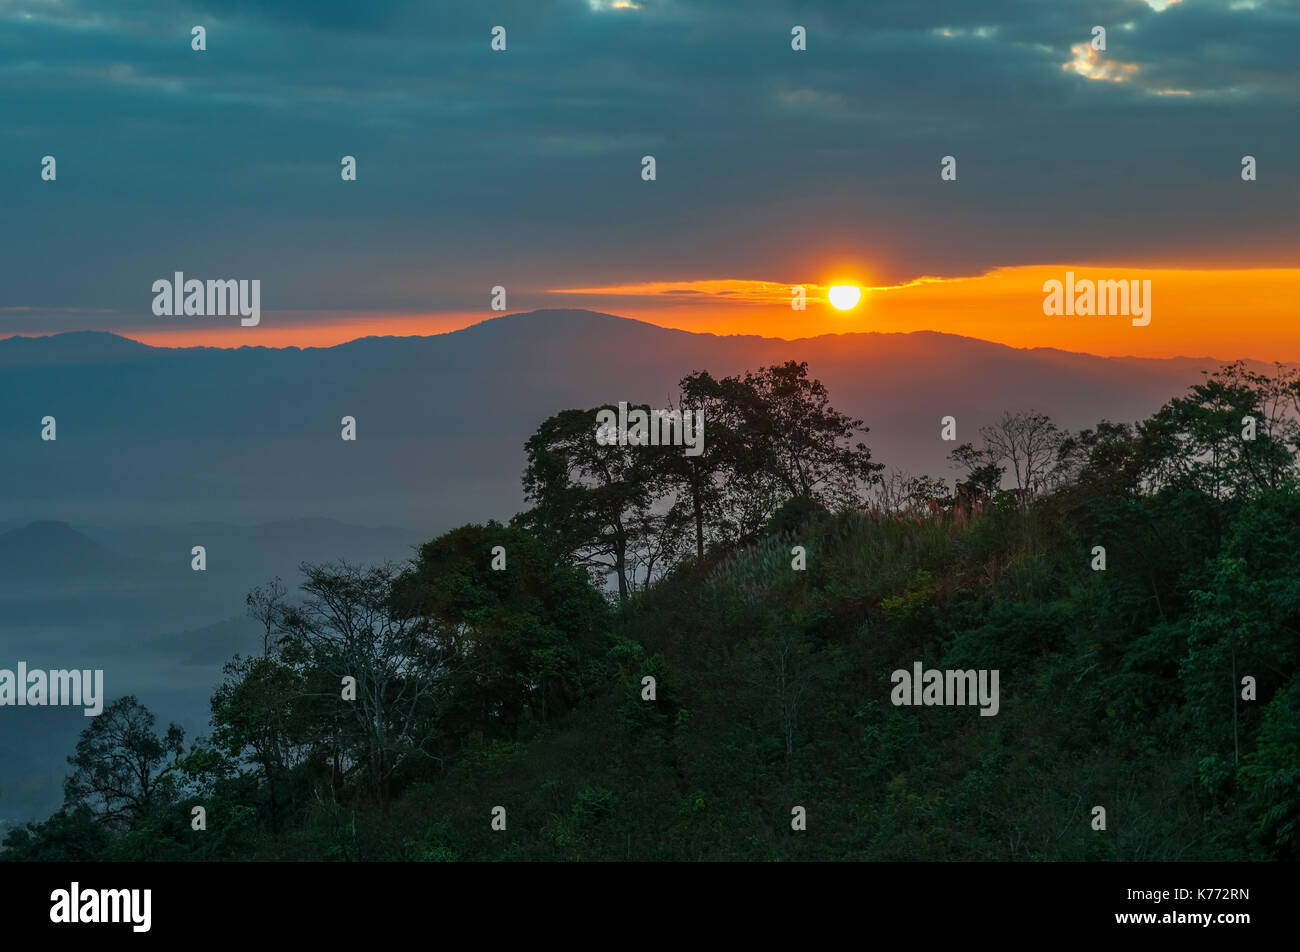 Sunset over the Andes mountain range entering the rainforest of the Amazon Basin in Ecuador. Stock Photo